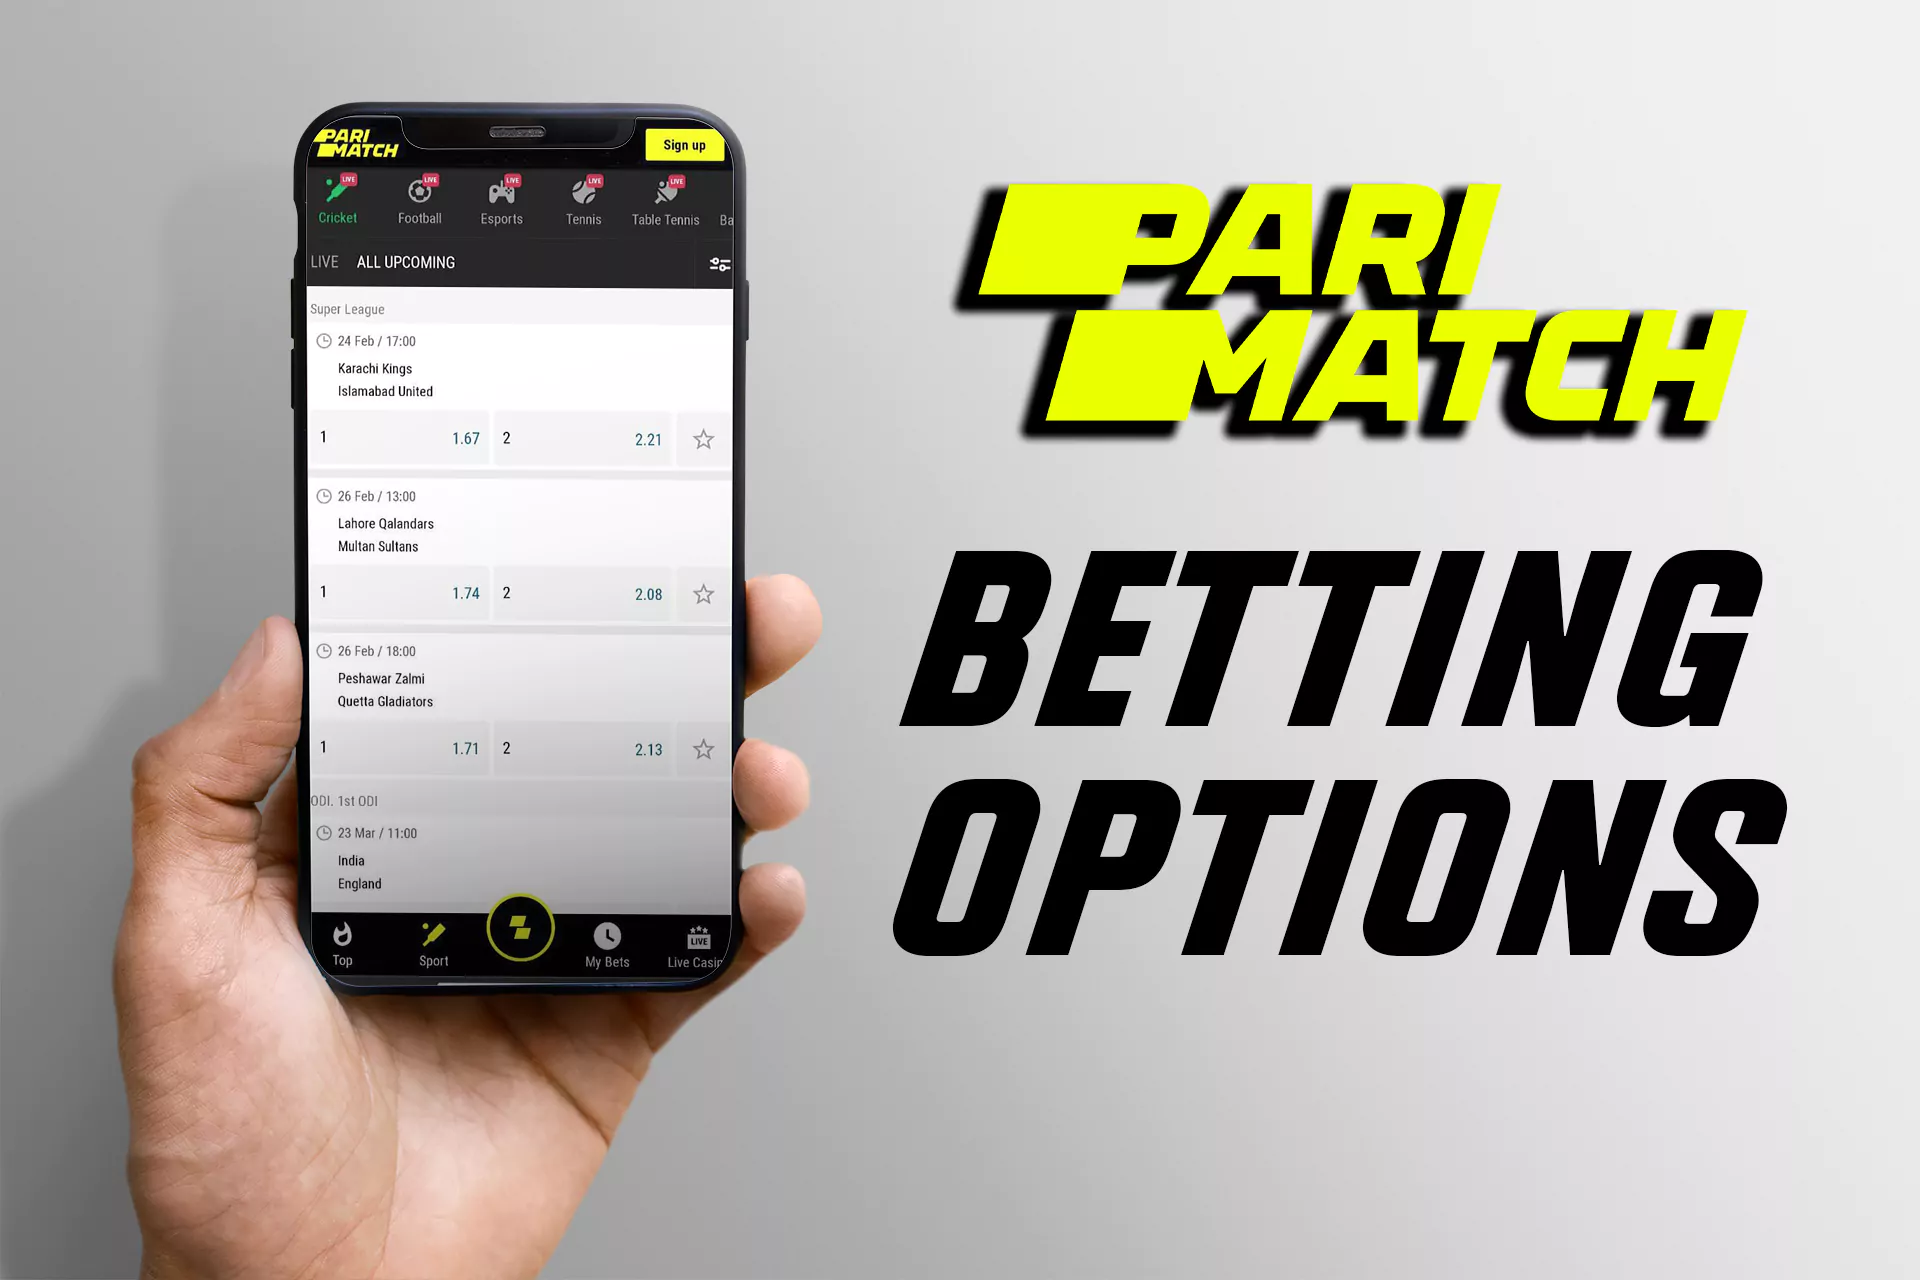 In the parimatch app you can bet on various sports. Take a look at our list.